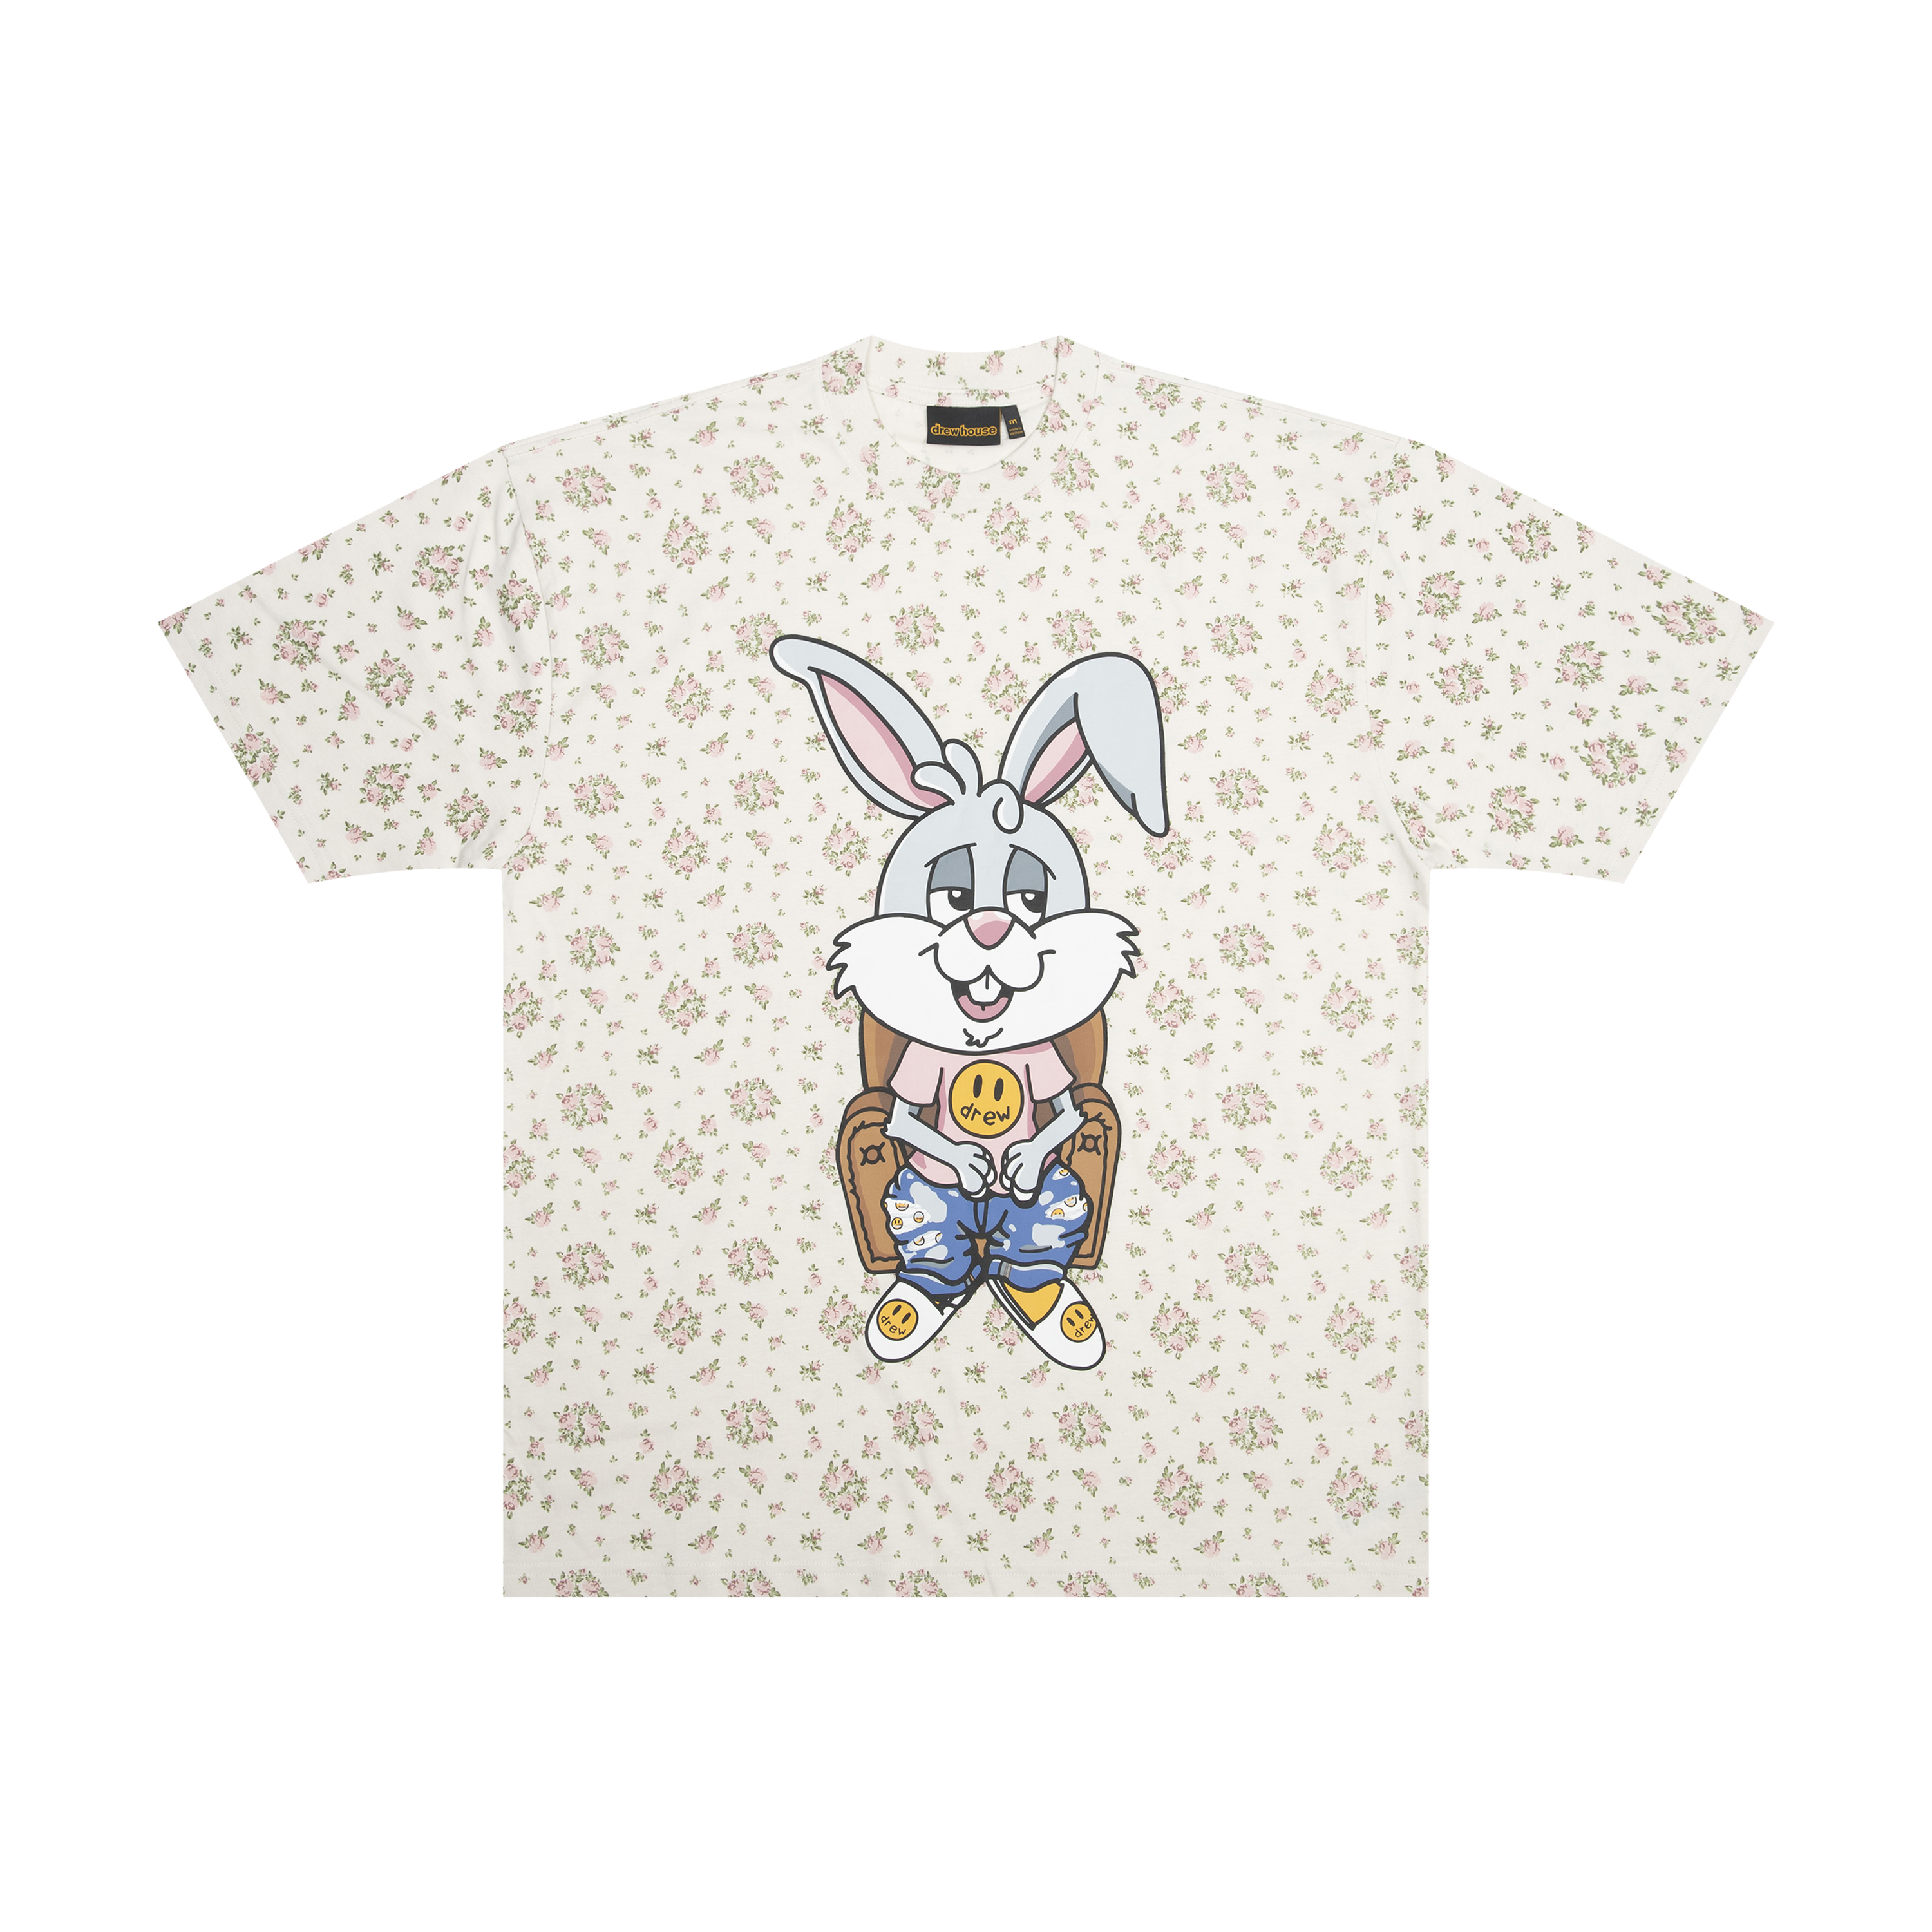 S jackie ss tee - ditsy floral - Tシャツ/カットソー(半袖/袖なし)